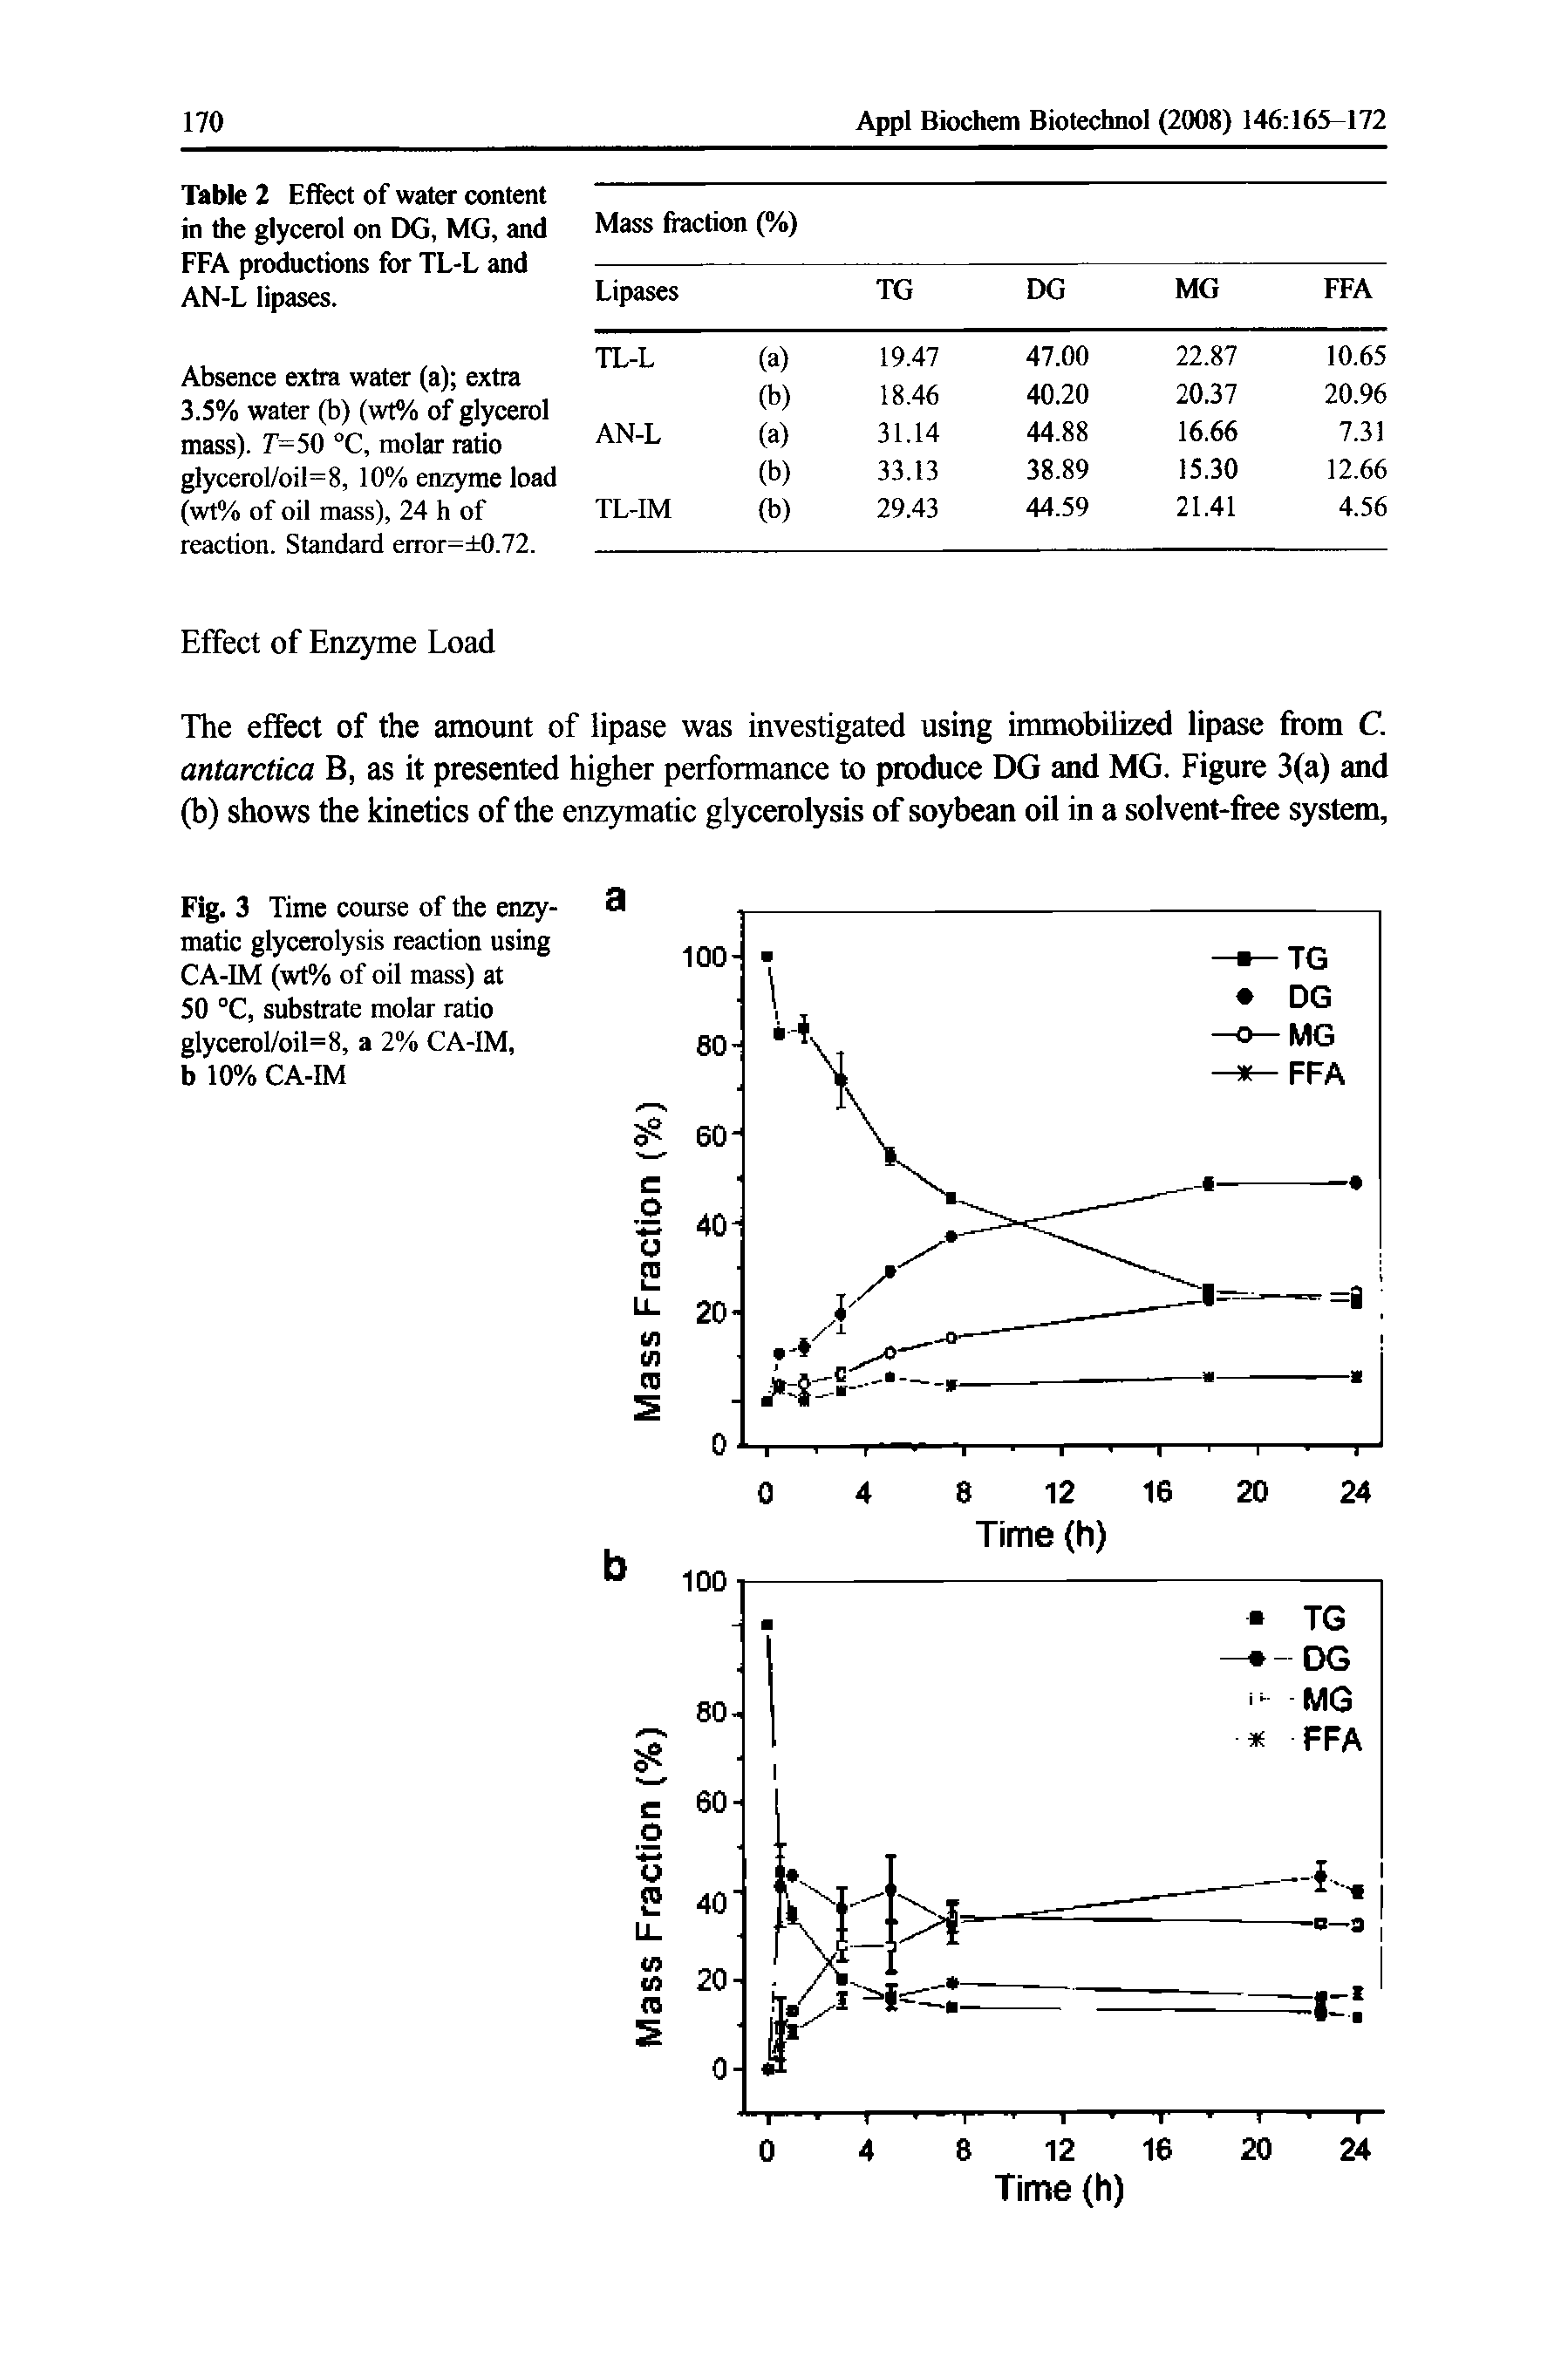 Fig. 3 Time course of the enzymatic glycerolysis reaction using CA-IM (wt% of oil mass) at 50 °C, substrate molar ratio glycerol/oil=8, a 2% CA-IM, b 10% CA-IM...